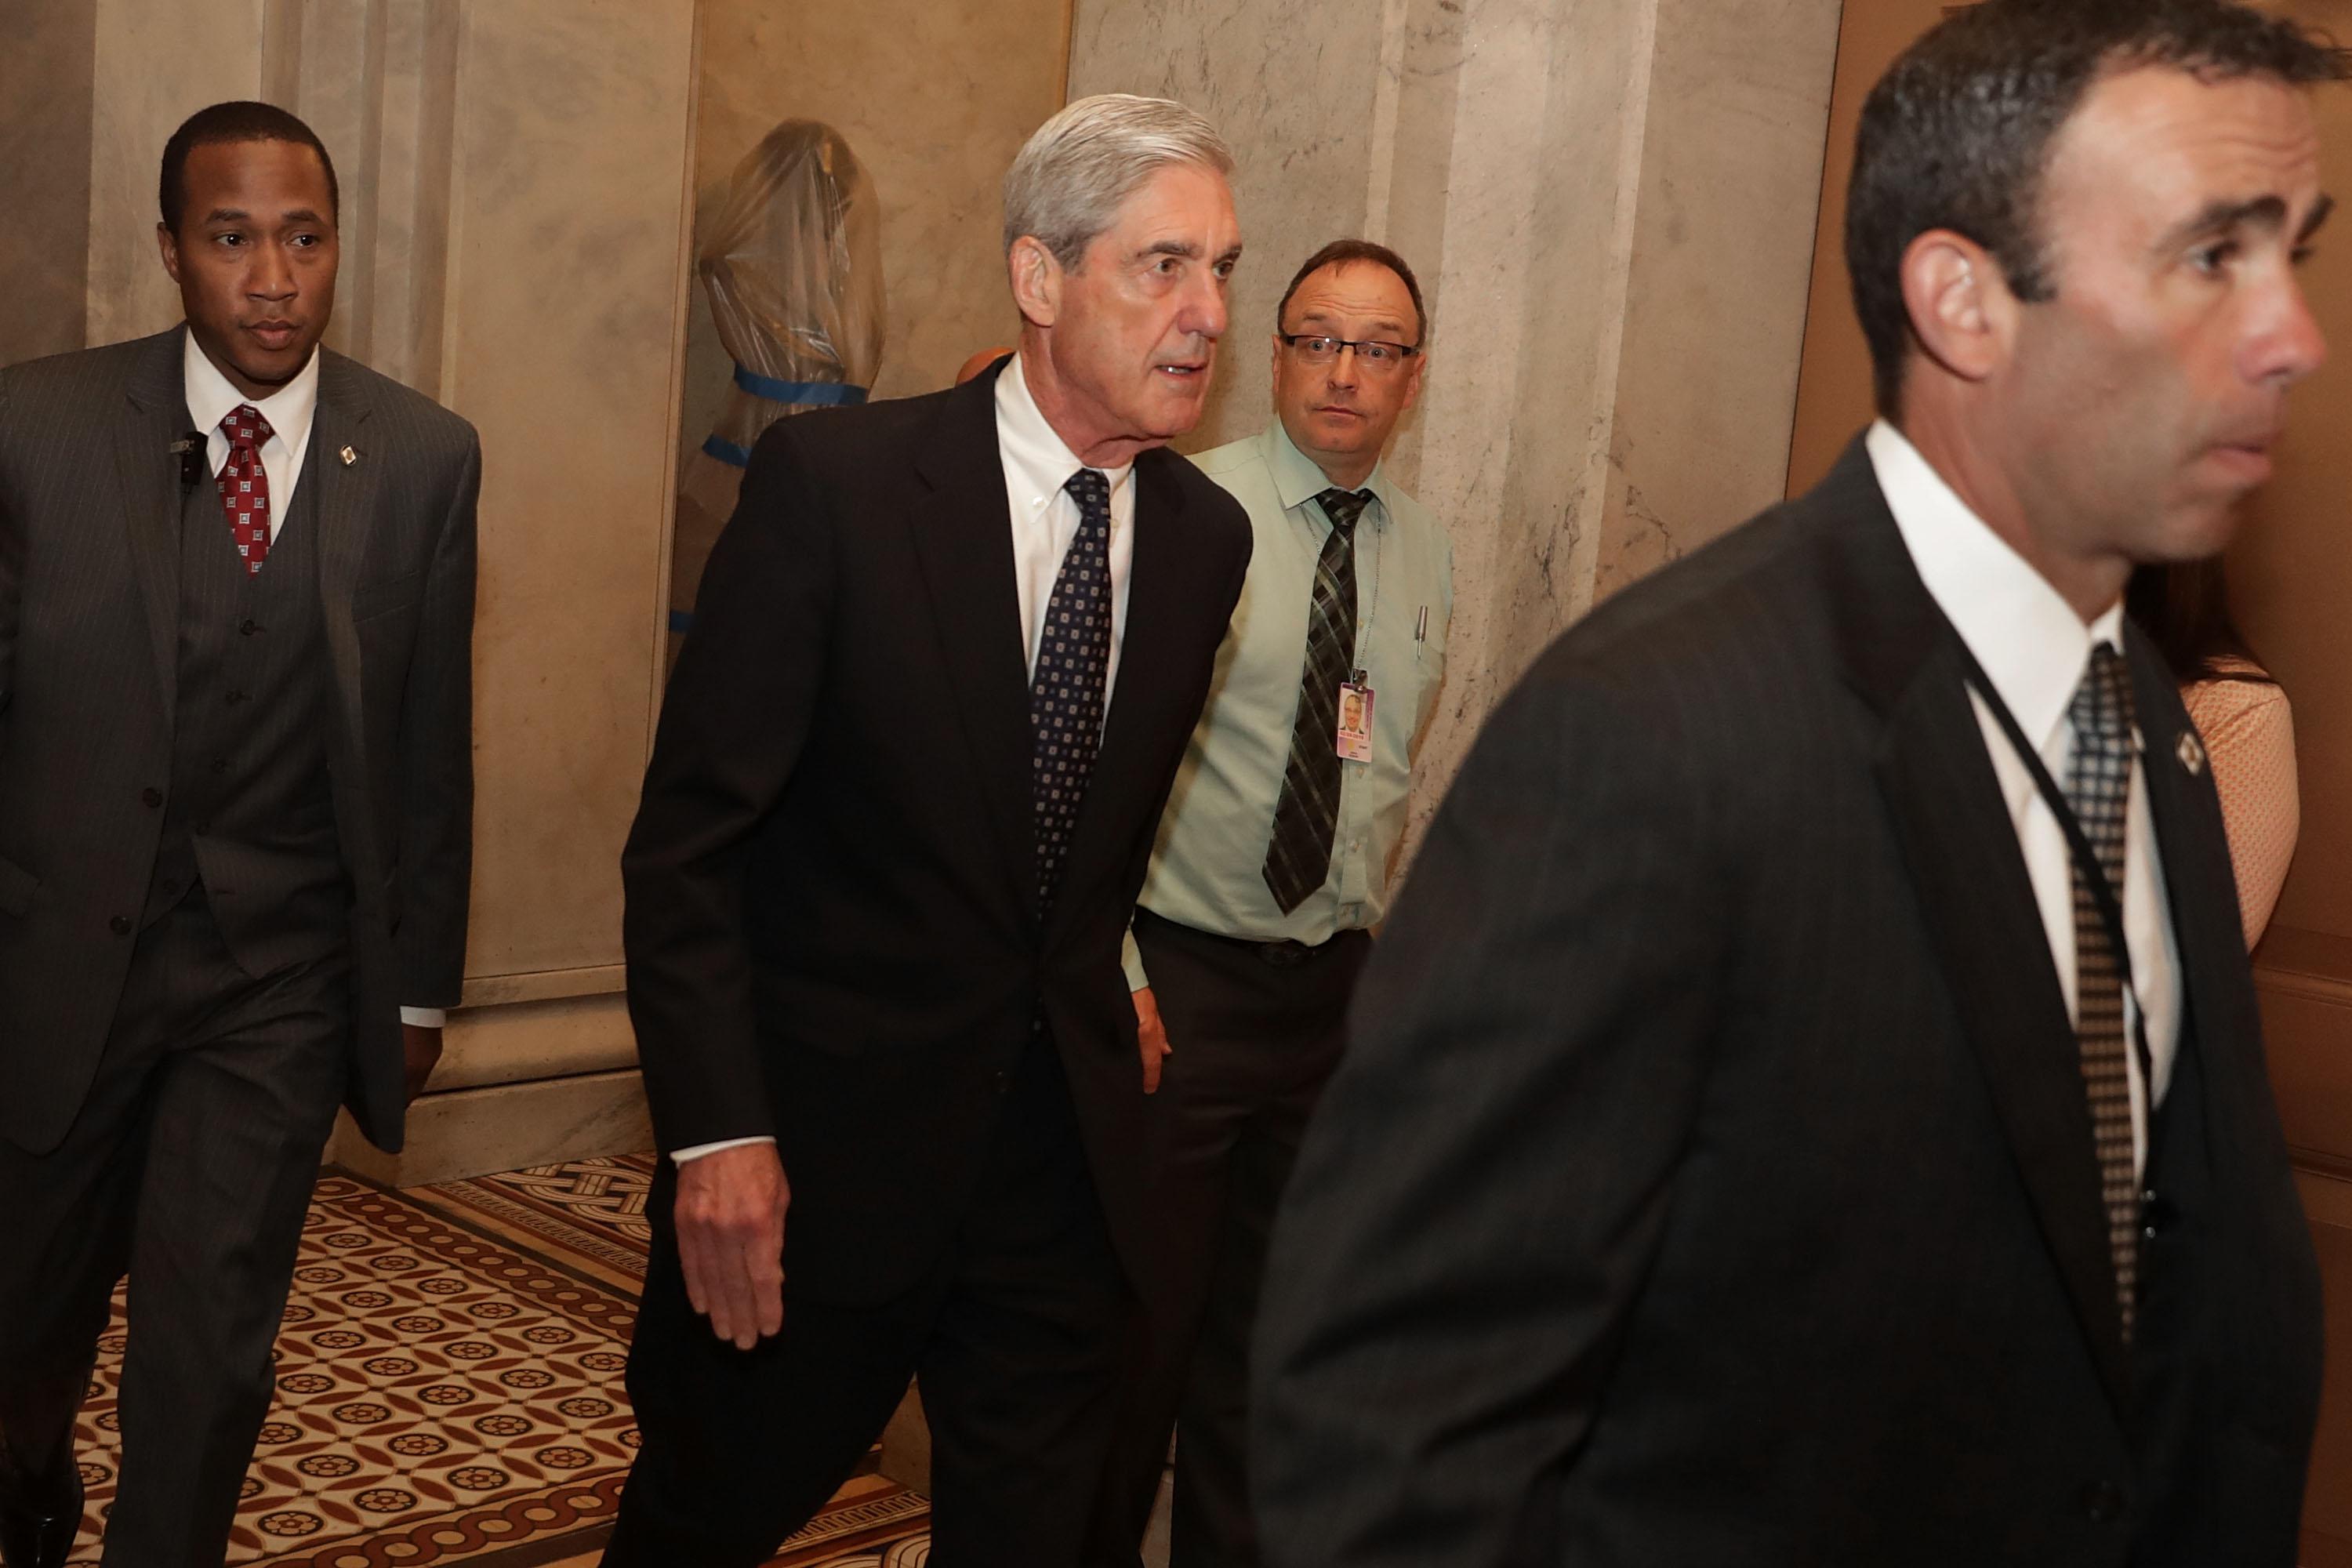 Former FBI Director Robert Mueller is surrounded by security and staff as he leaves a meeting with senators at the U.S. Capitol June 21, 2017 in Washington, DC. 